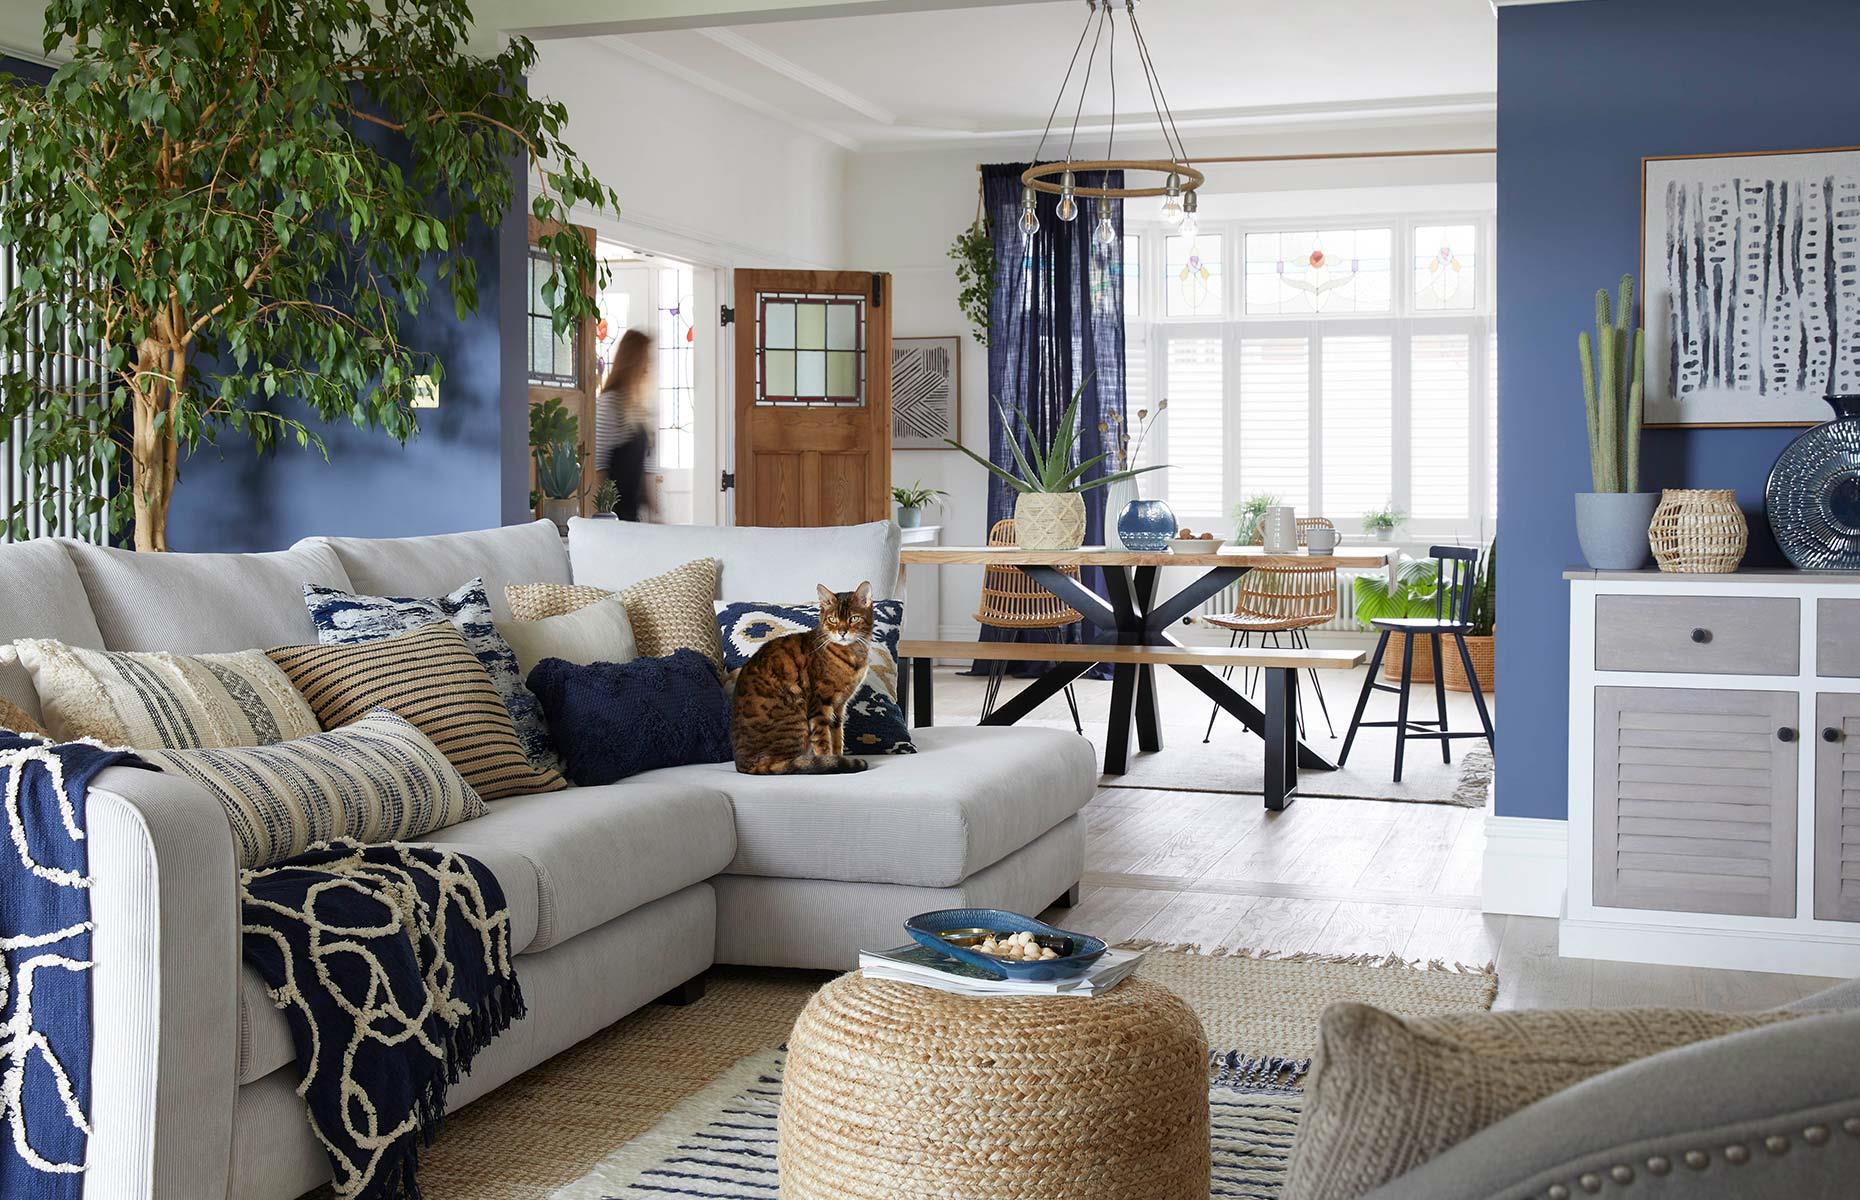 Create a cohesive look in a large, multiuse space by embracing a unifying theme. Here, a subtle coastal scheme works hard to tie together the living room and dining area. Deep blue walls and furnishings create a visual connection and draw the eye through the adjacent spaces, while jute and rattan accessories complete the harmonious feel.